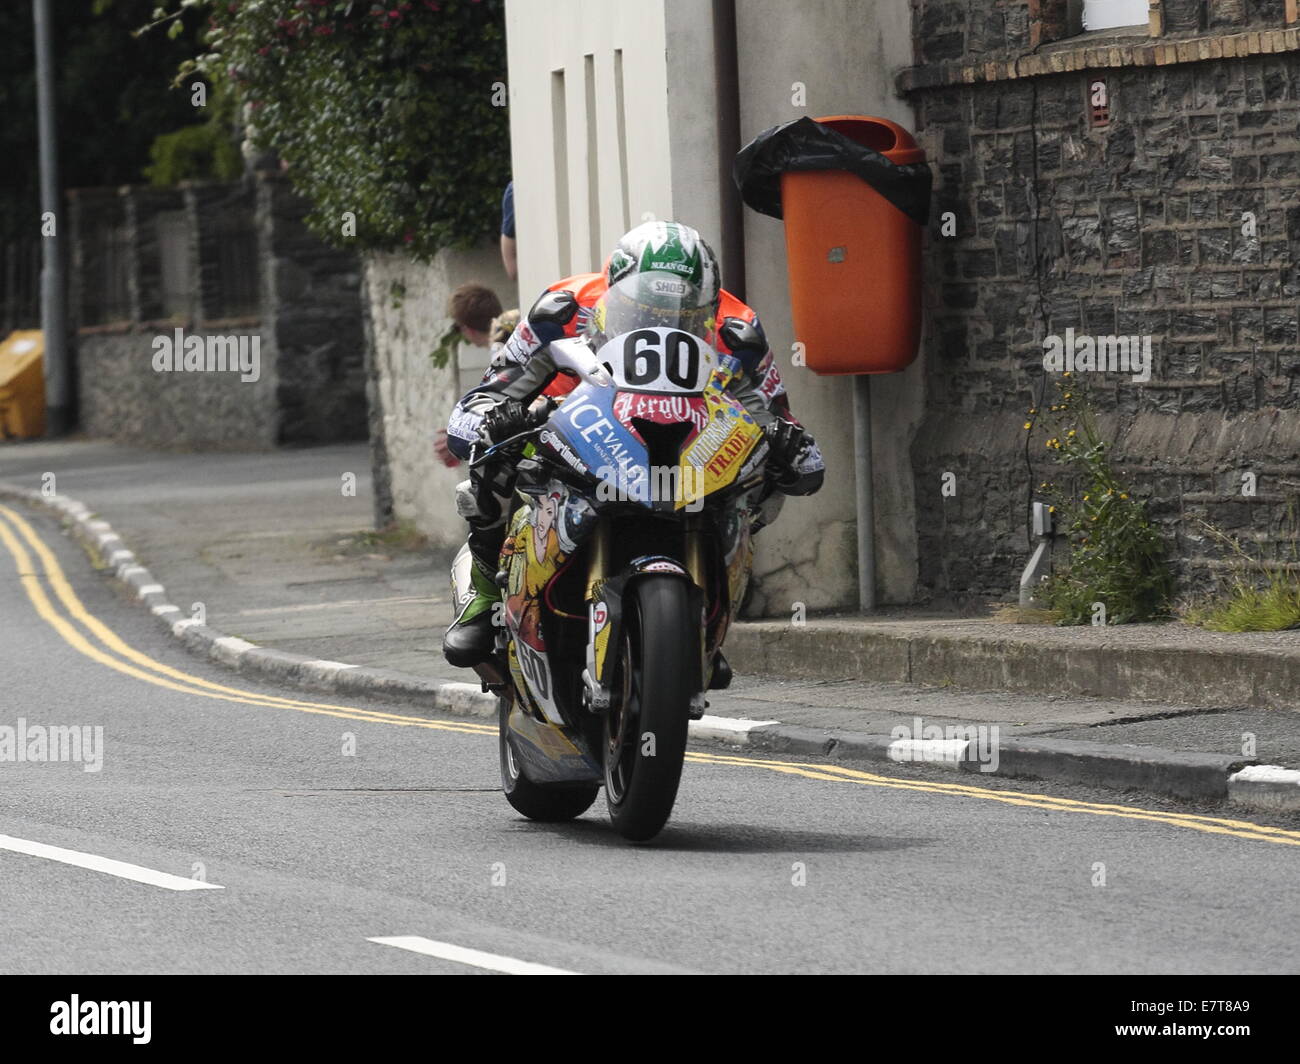 Peter Hickman riding his Ice Valley BMW Superbike in the Seniors race, during the 2014 Isle of Man TT. Stock Photo